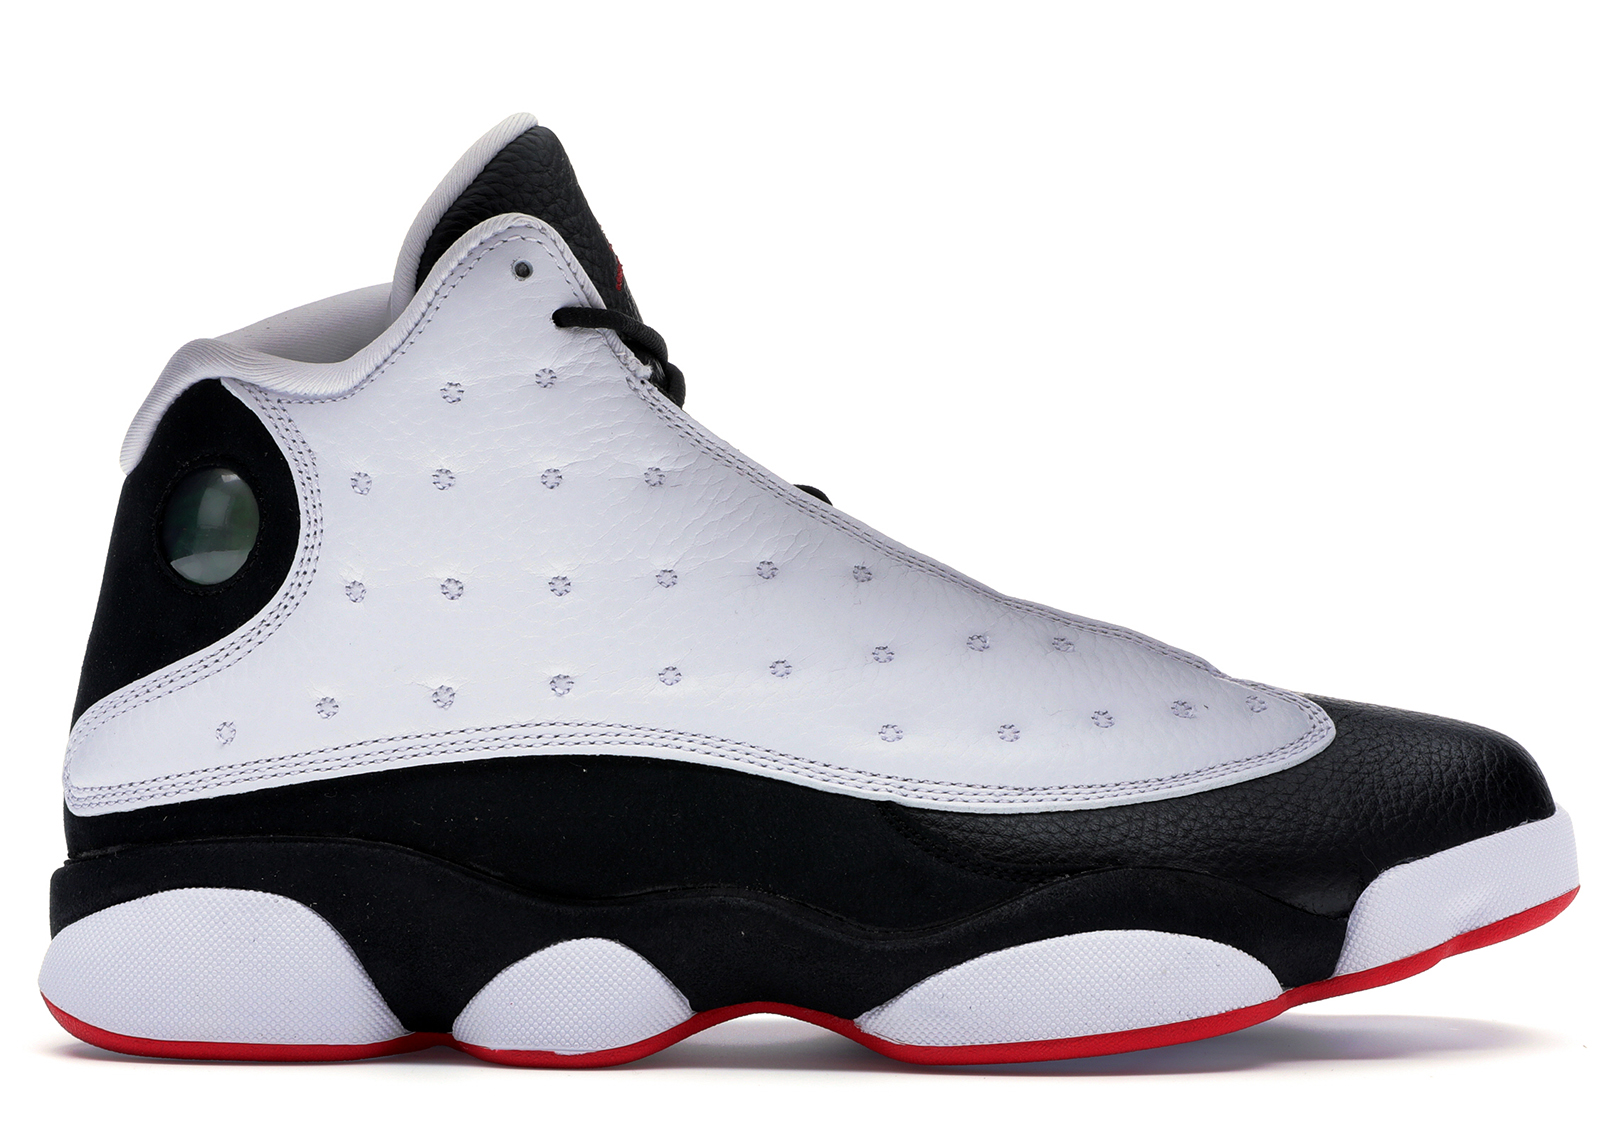 retro 13s black and red